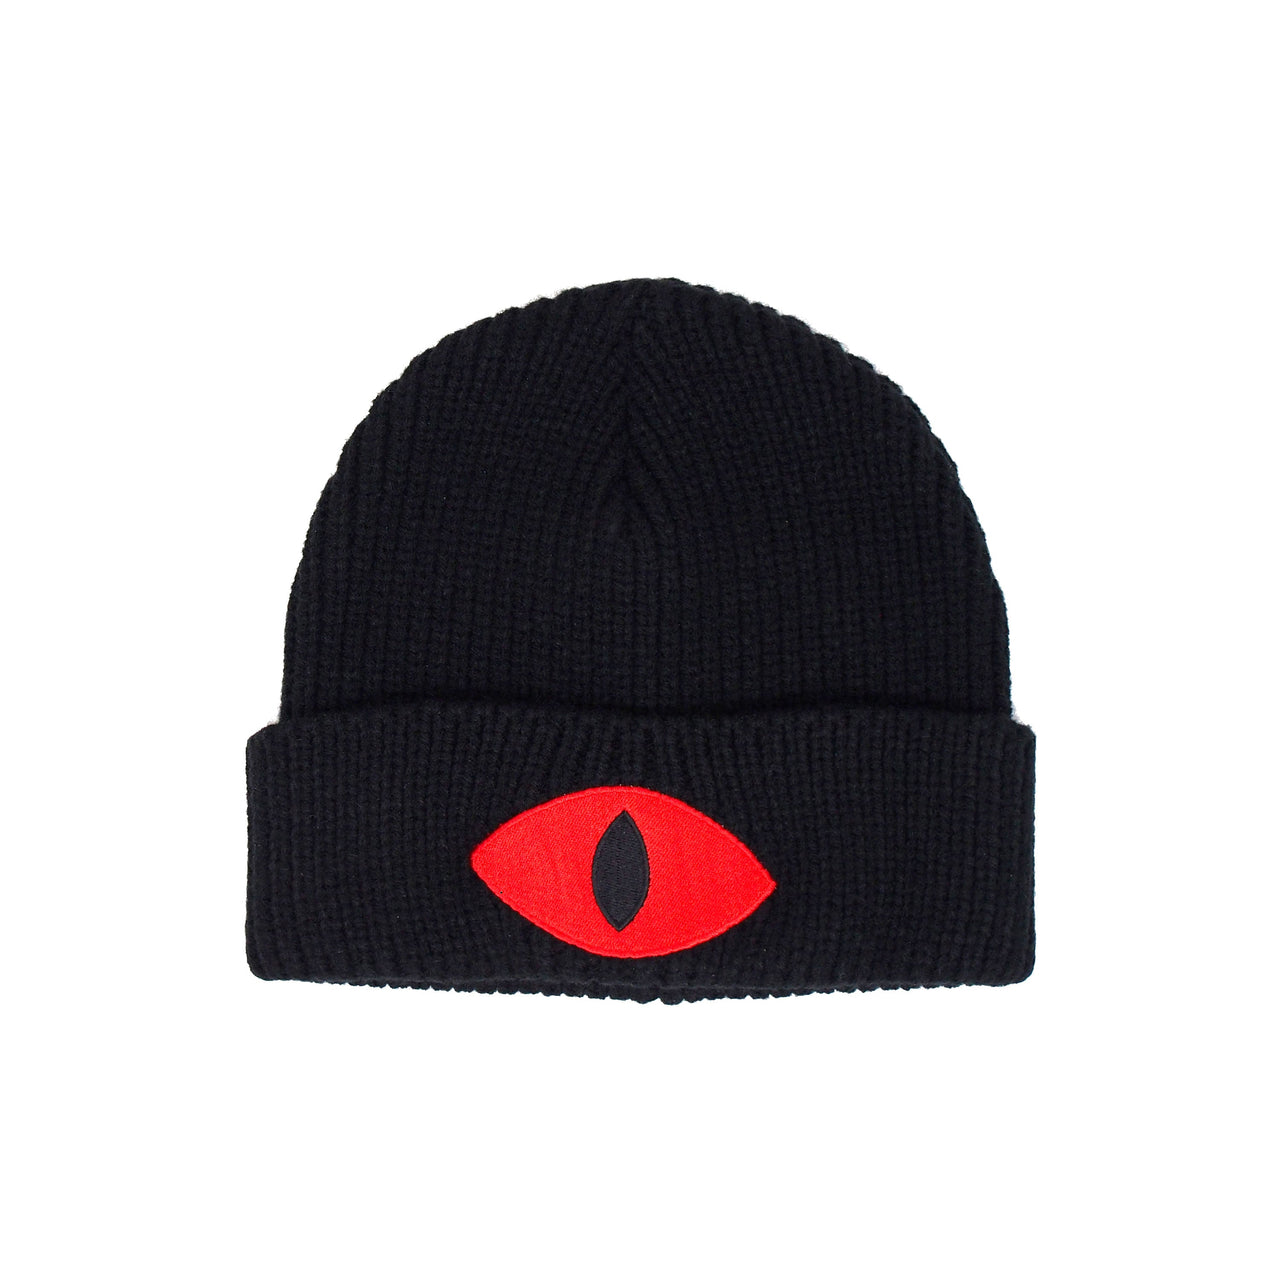 Cult of the Lamb Embroidered Eye Beanie Hat (Black)